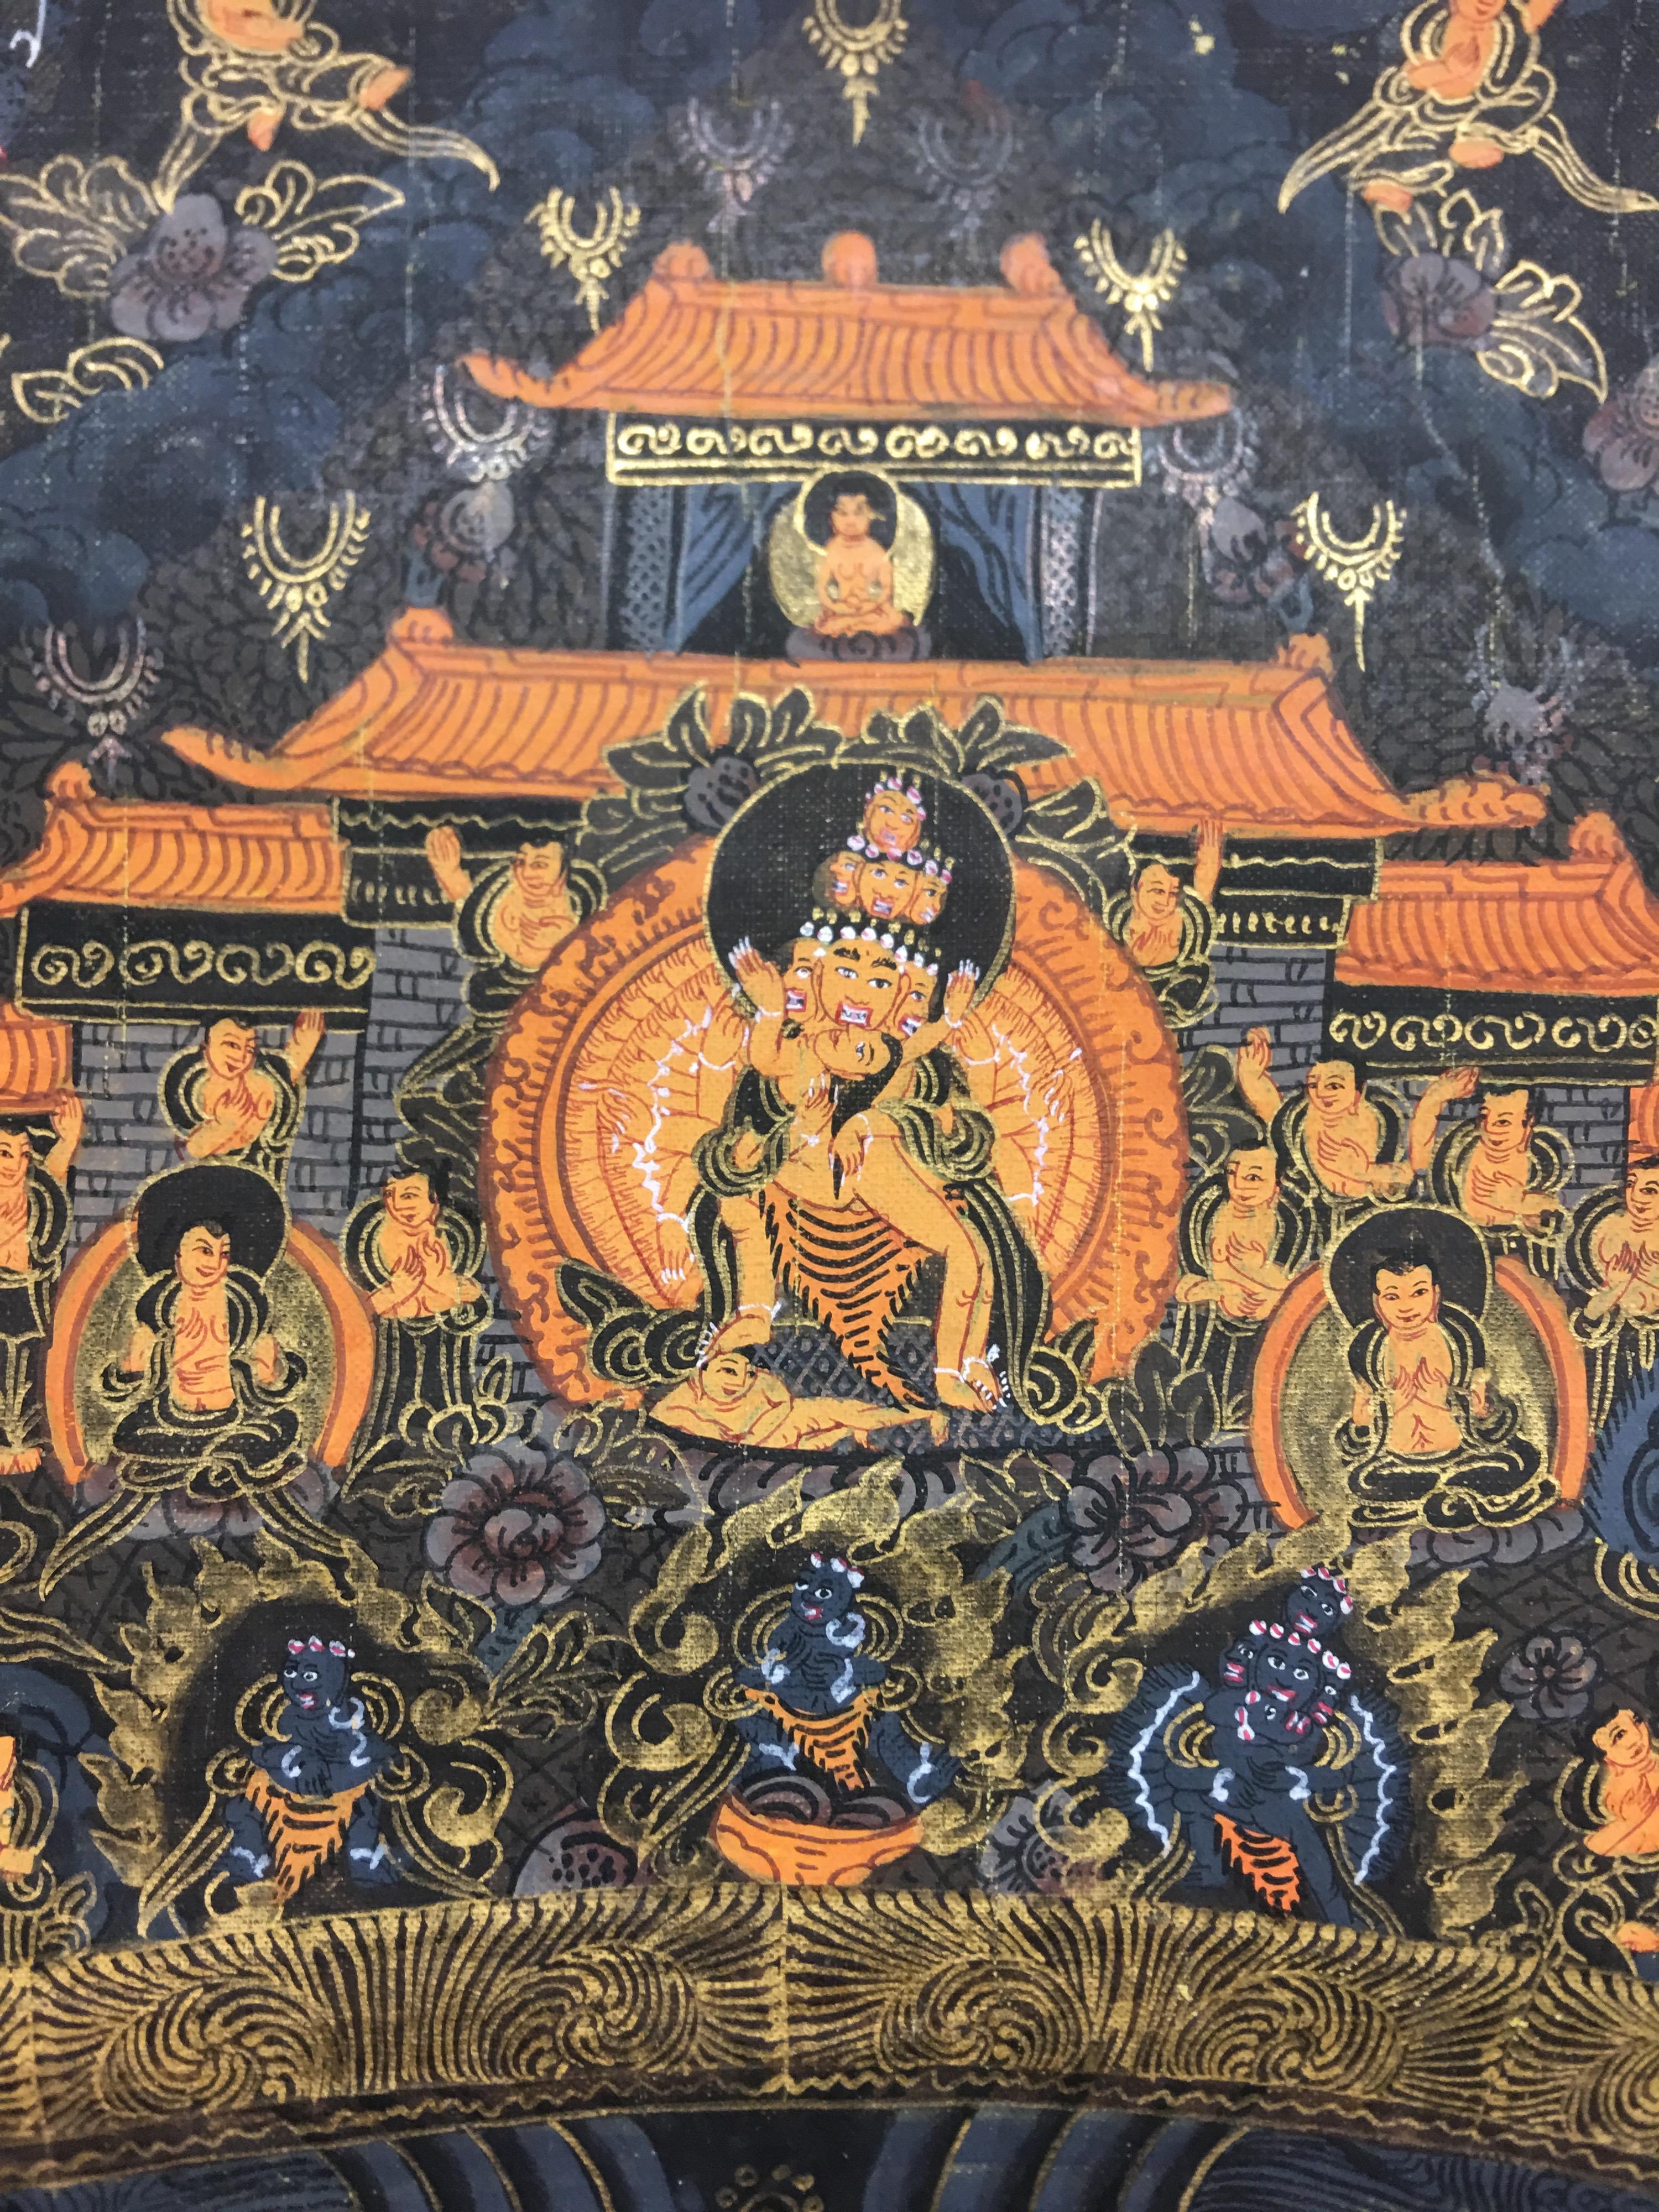 Ten Mandala 24 carat real gold painted on canvas is a one of a kind Thangka Painting. The thangka is ritual Buddhist Painting use to pray or Meditation purpose. Several steps are involved in the process of making a thangka involved canvas